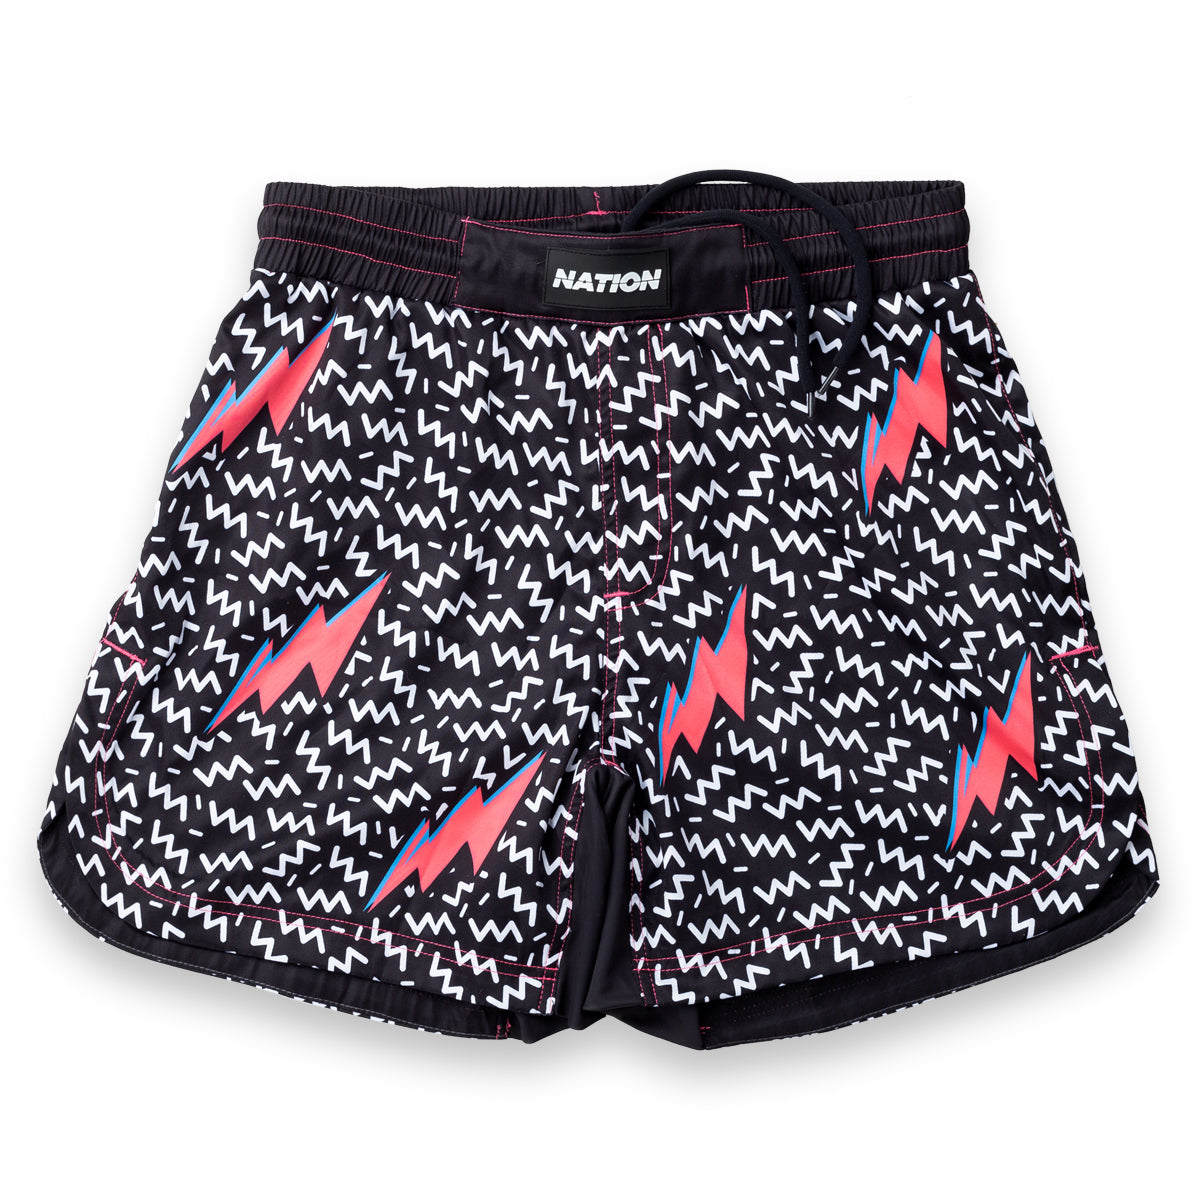 Vetements Monogram-trimmed Stretch Shorts In Pink